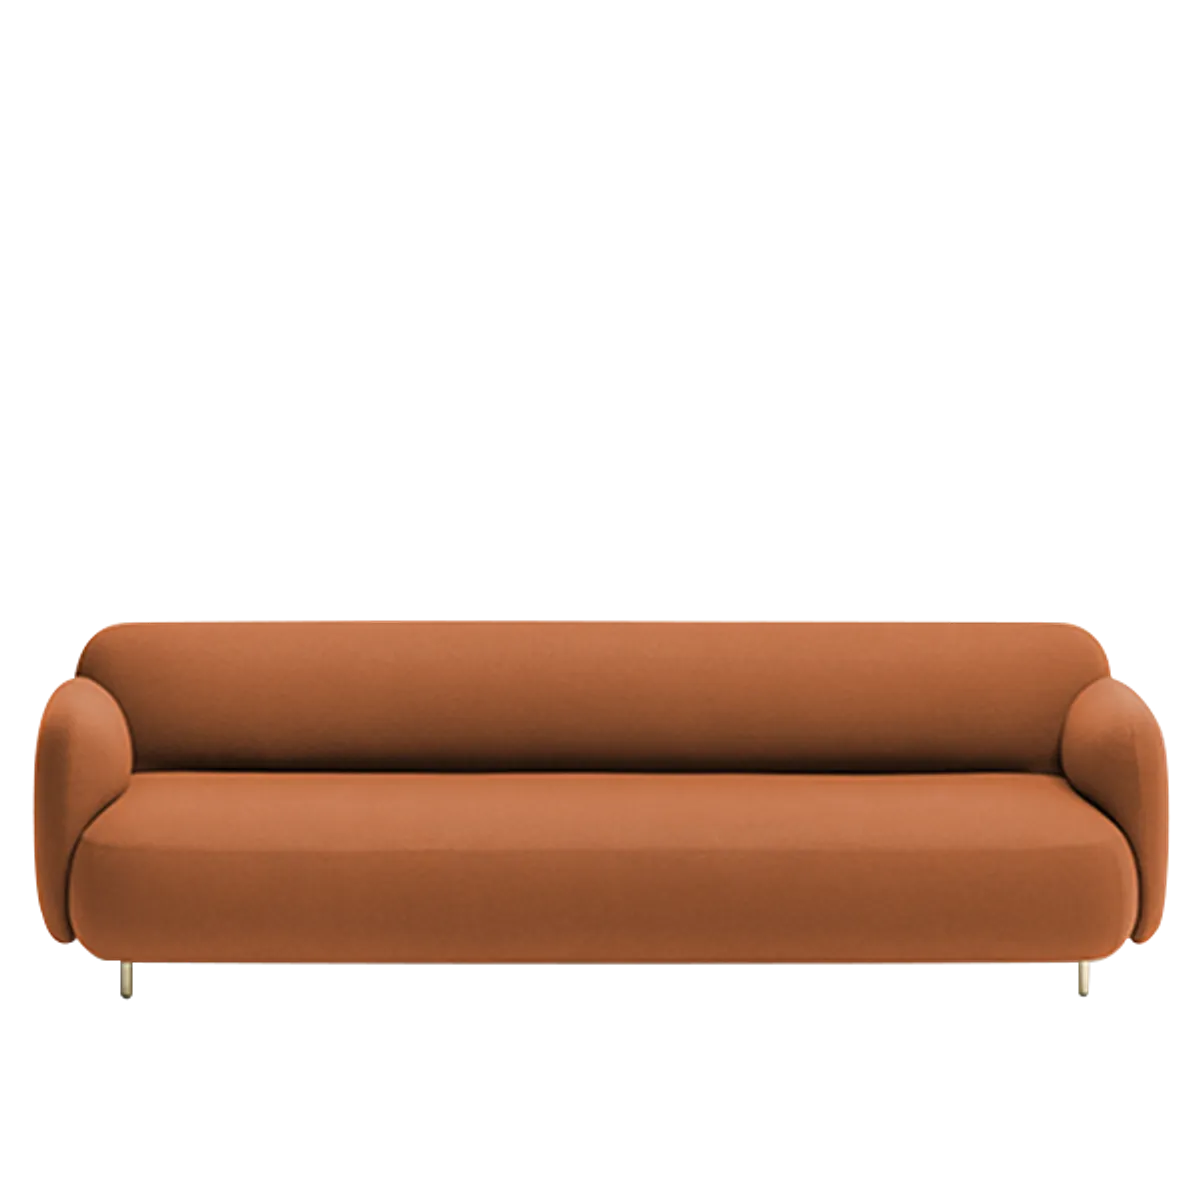 Web Buddy Sofa Xl Inside Out Contracts